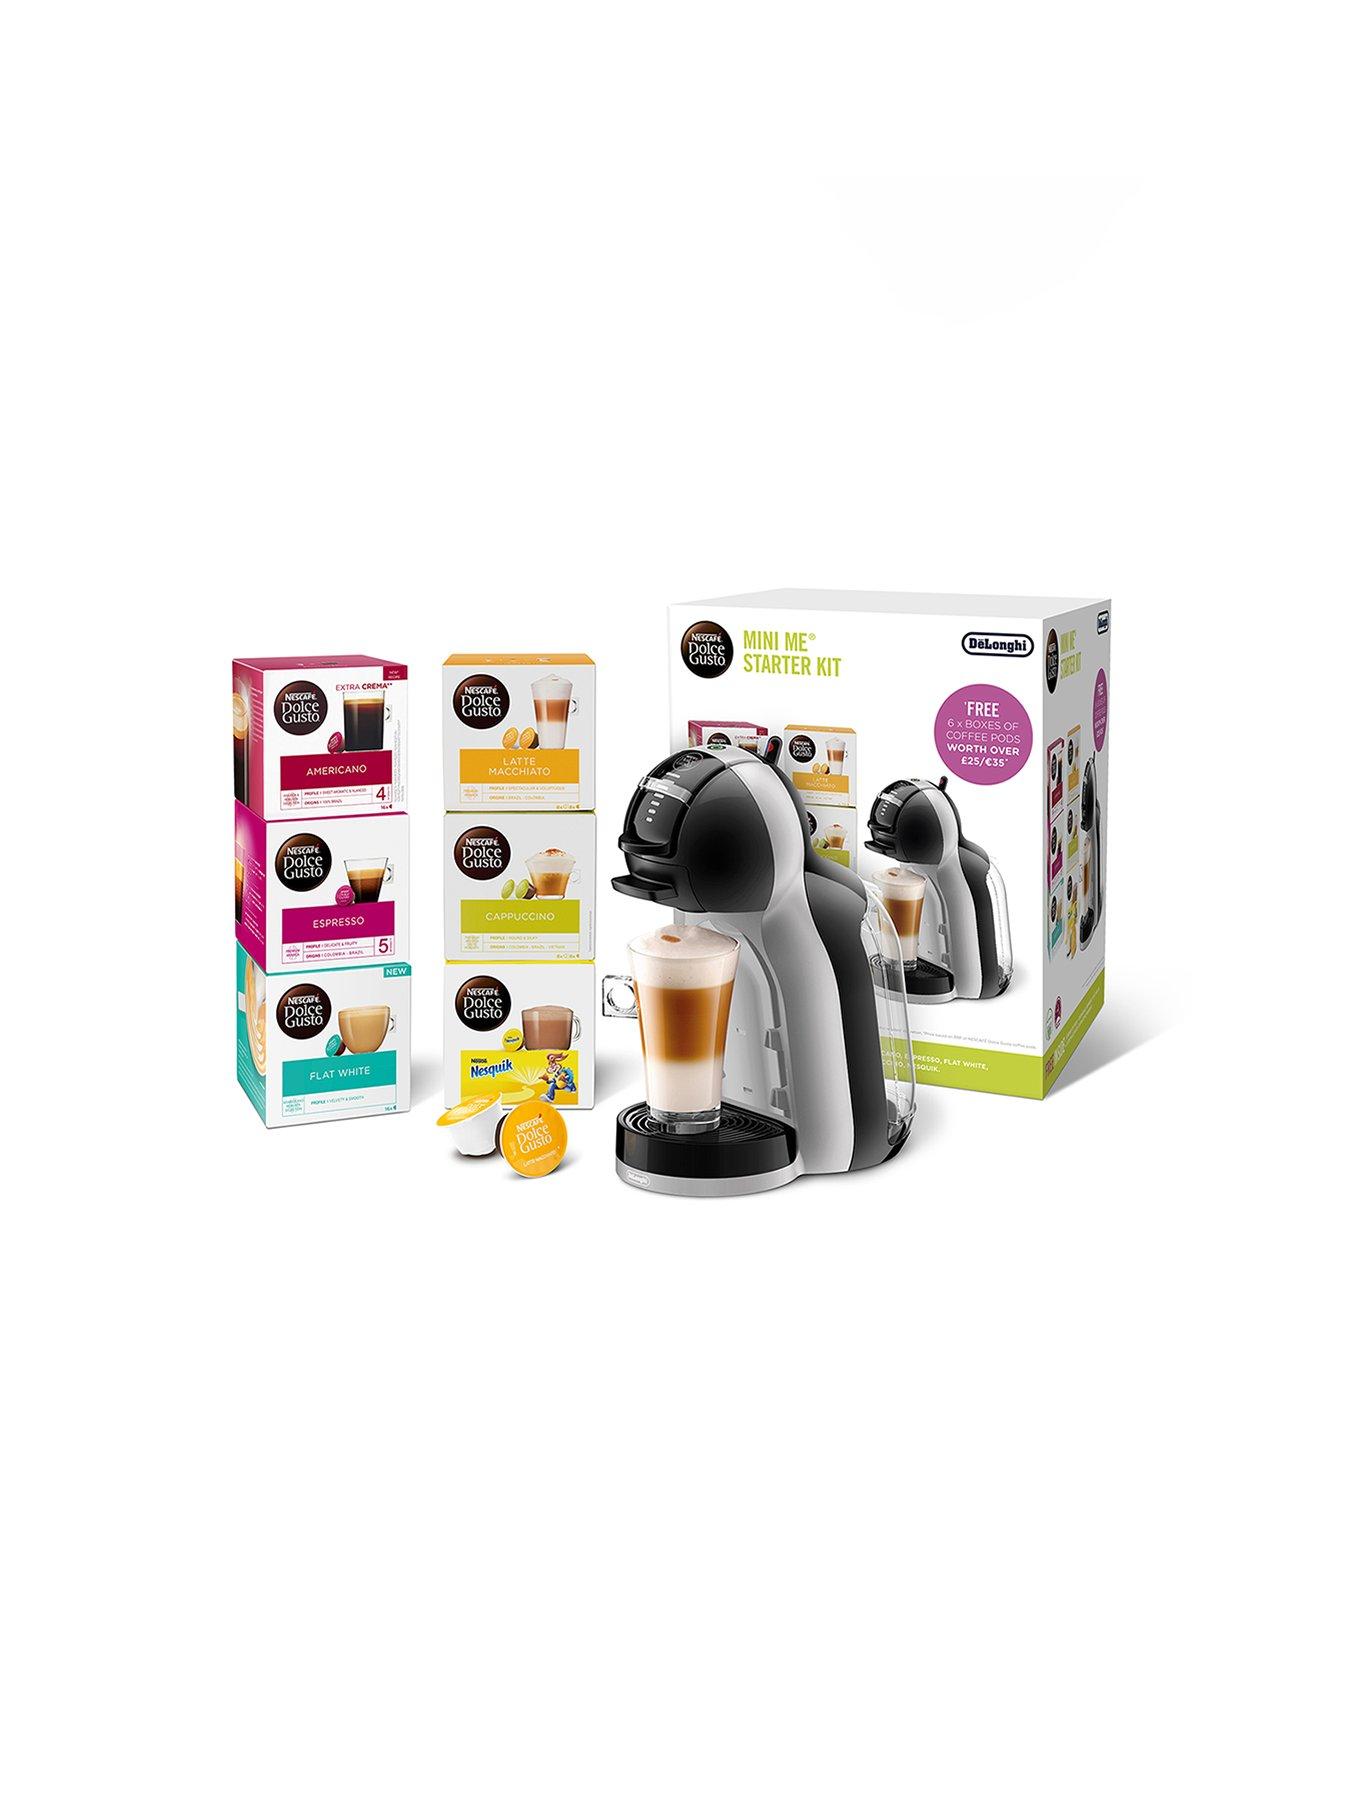 Nescafe Dolce Gusto Drop Coffee Maker Capsule Espresso Machine Household  Automatic Touch Screen 15bar KRUPS Cool New Design